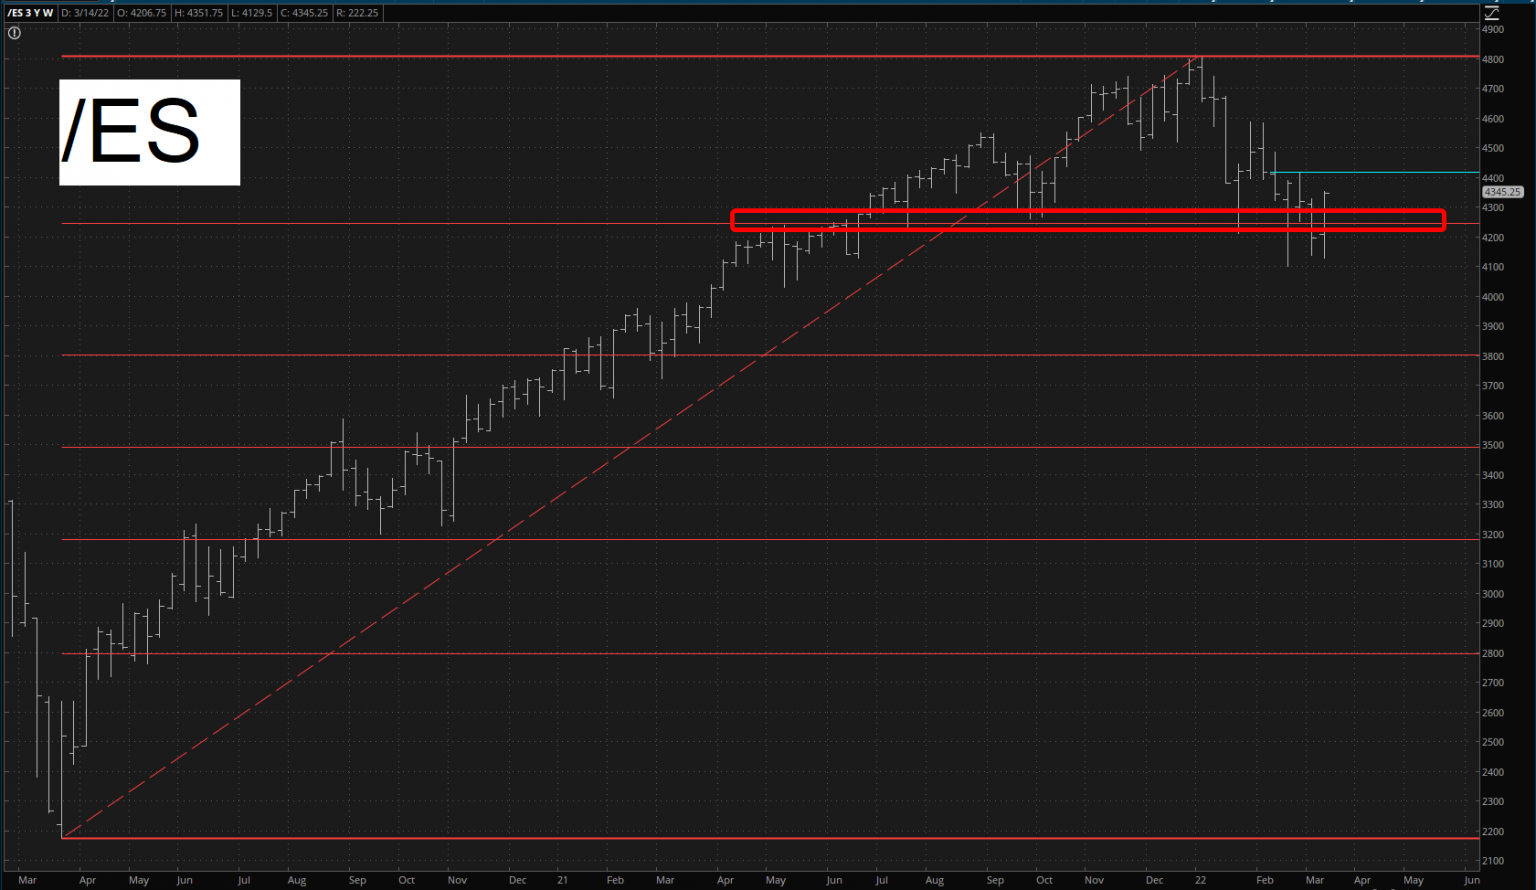 S&P 500 Futures Weekly Chart.